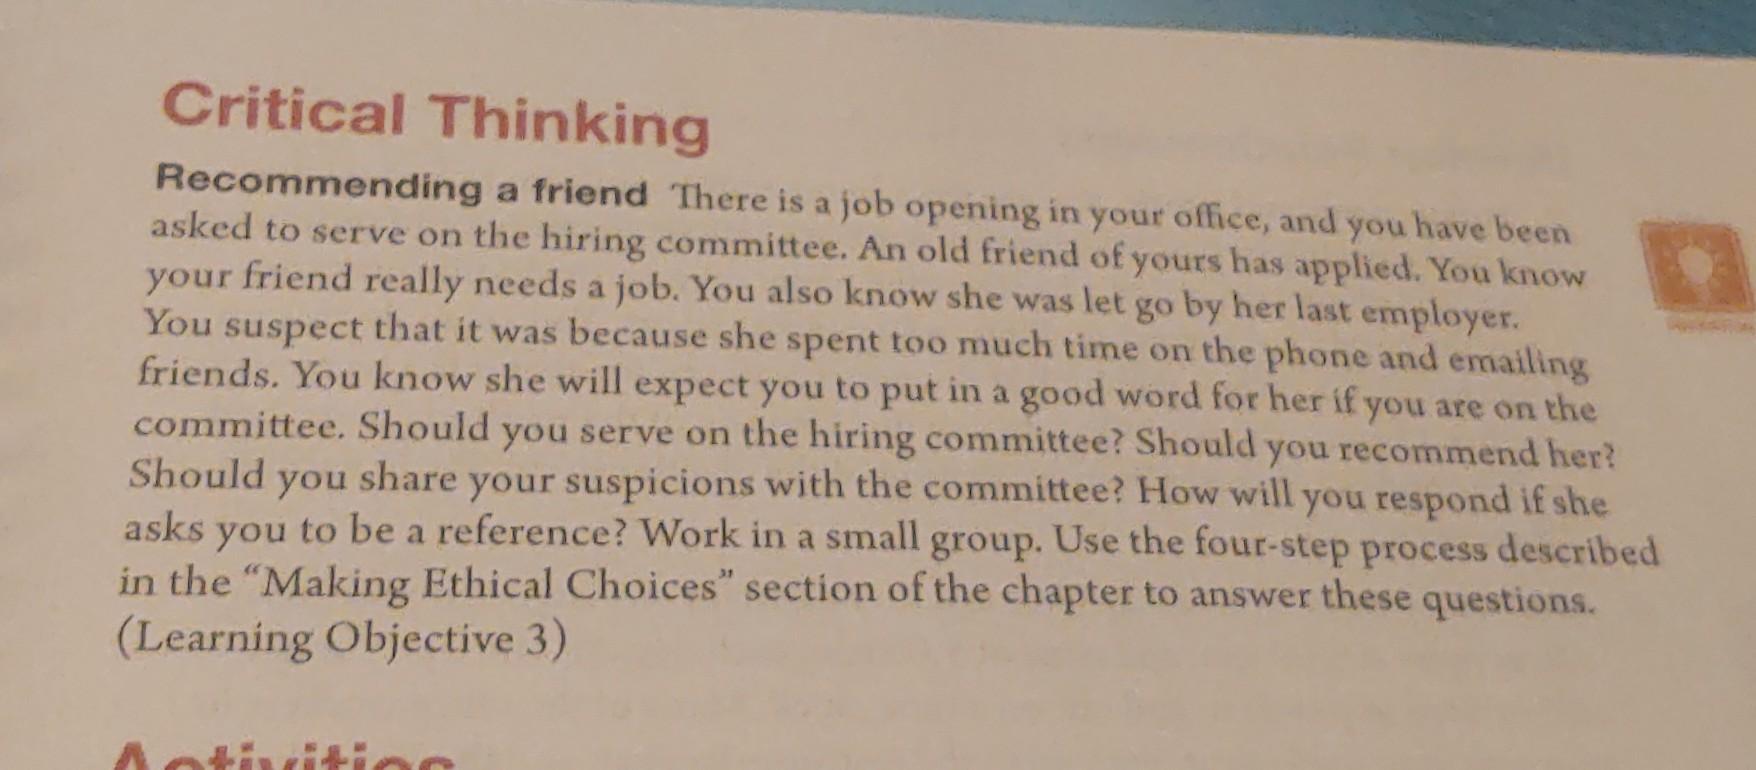 Critical Thinking Recommending a friend There is a job opening in your office, and you have been asked to